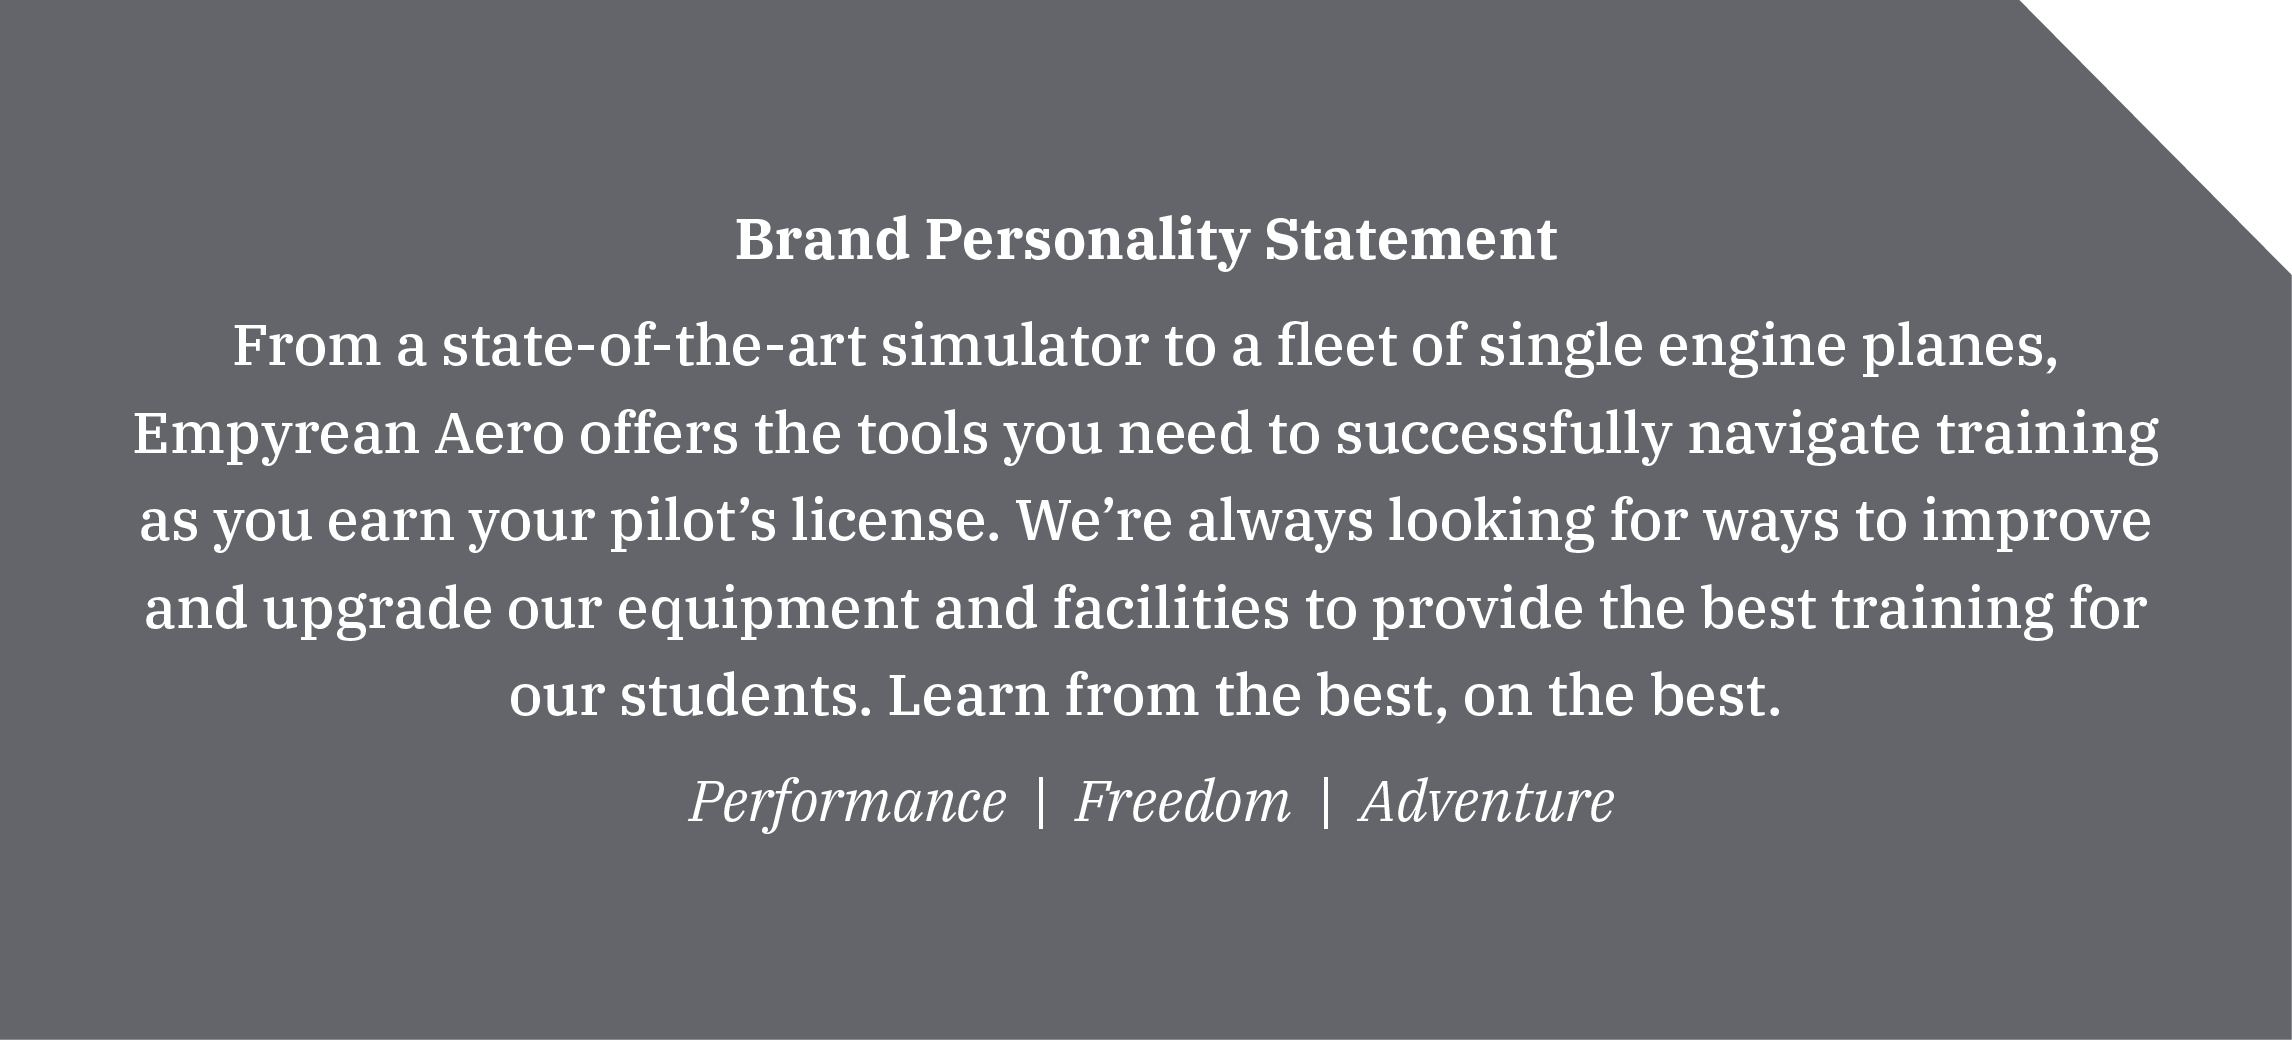 Brand Personality Statement From a state-of-the-art simulator to a fleet of single engine planes, Empyrean Aero offers the tools you need to successfully navigate training as you earn your pilot’s license. We’re always looking for ways to improve and upgrade our equipment and facilities to provide the best training for our students. Learn from the best, on the best. Performance | Freedom | Adventure